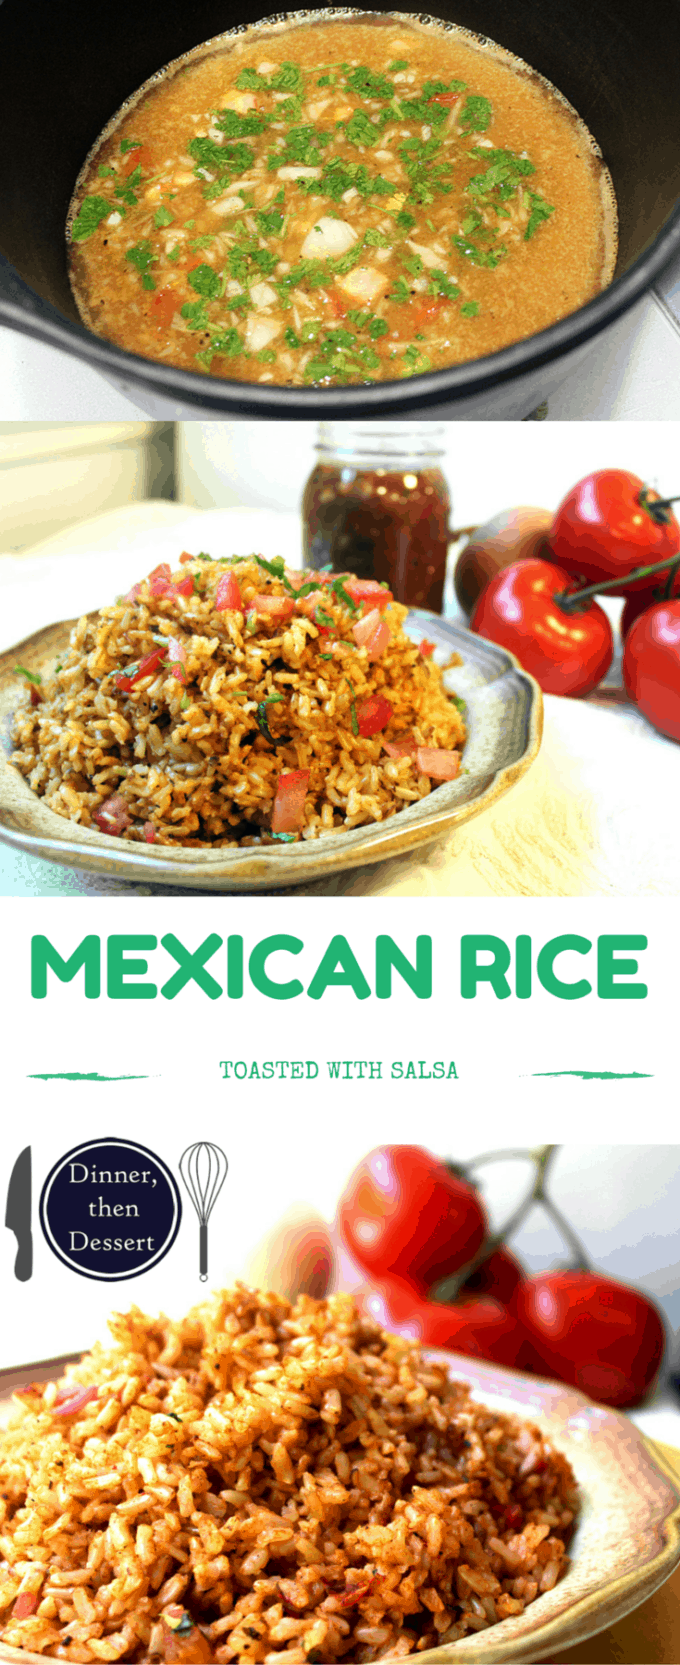 Toasted Mexican Rice - Dinner, then Dessert